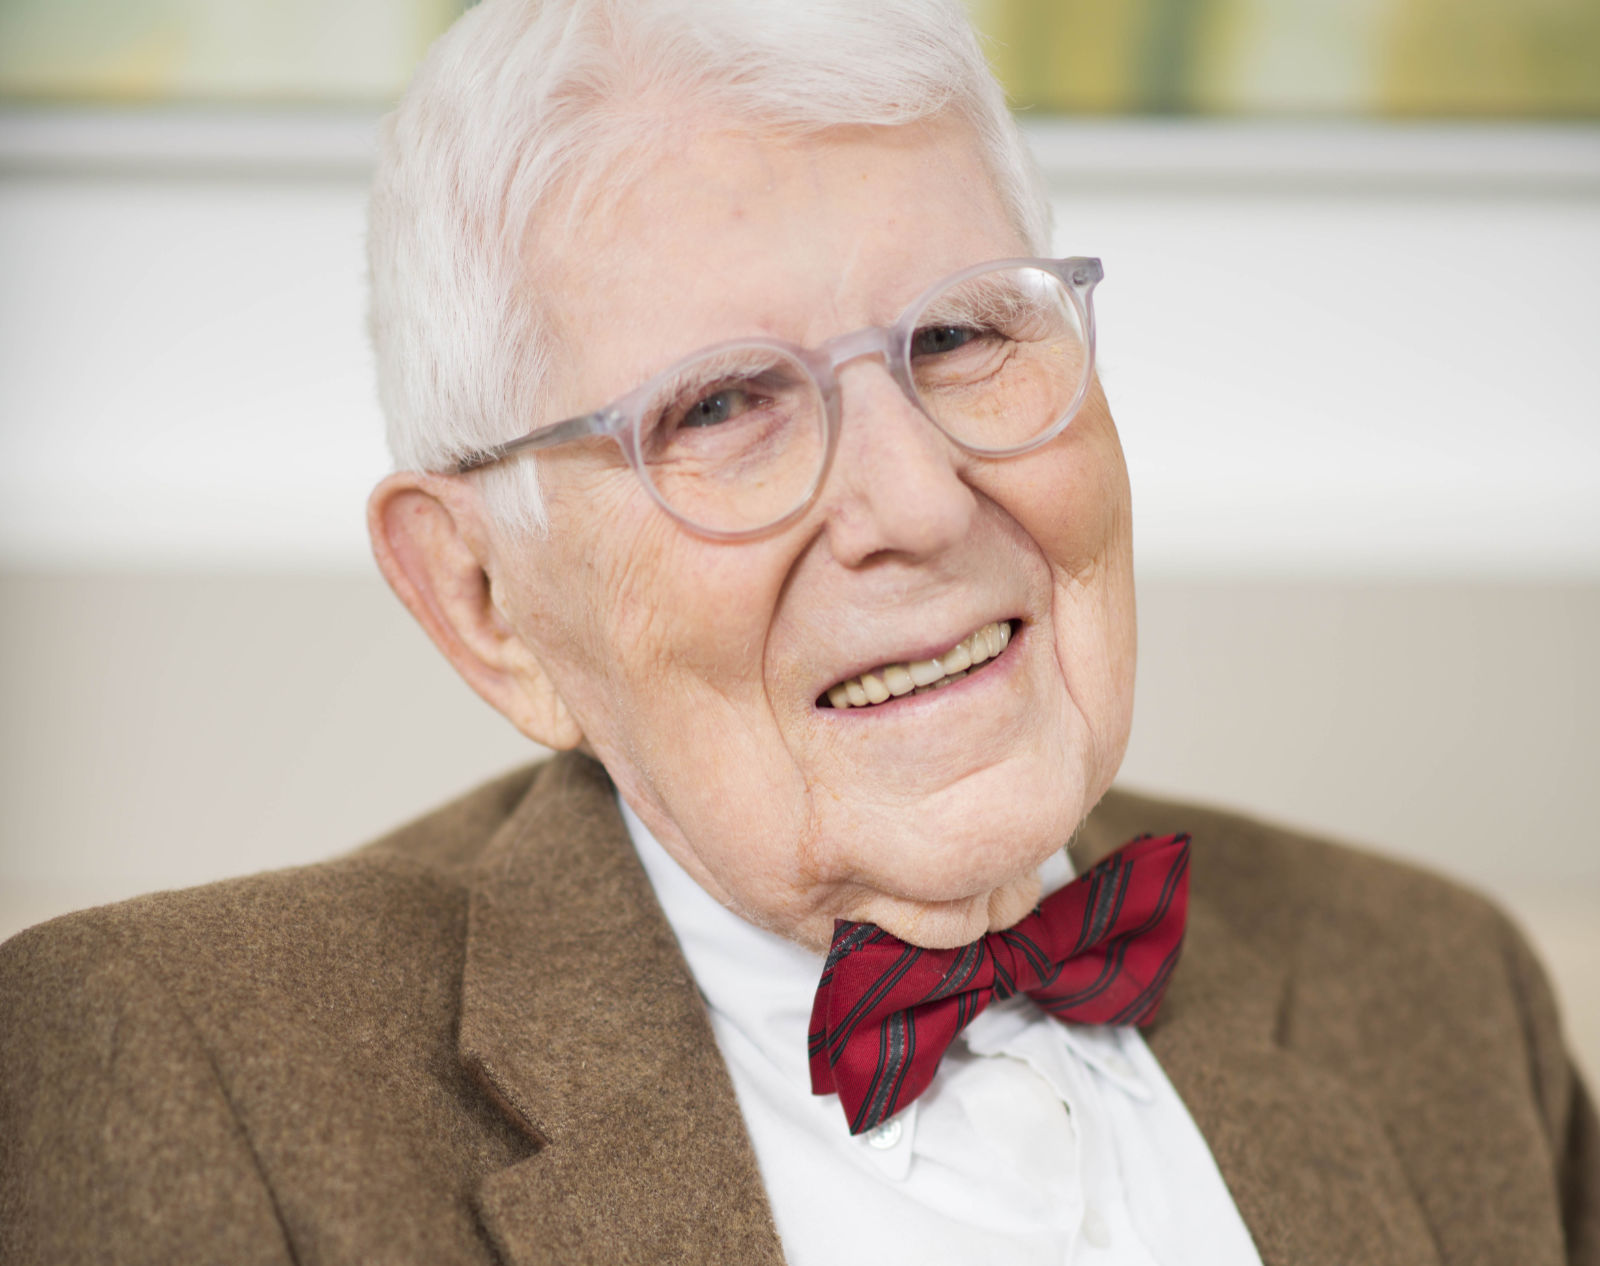 Long Live Aaron Beck Dr. Richard Bennett remembers Aaron Beck (1921-2021), the founder of cognitive therapy